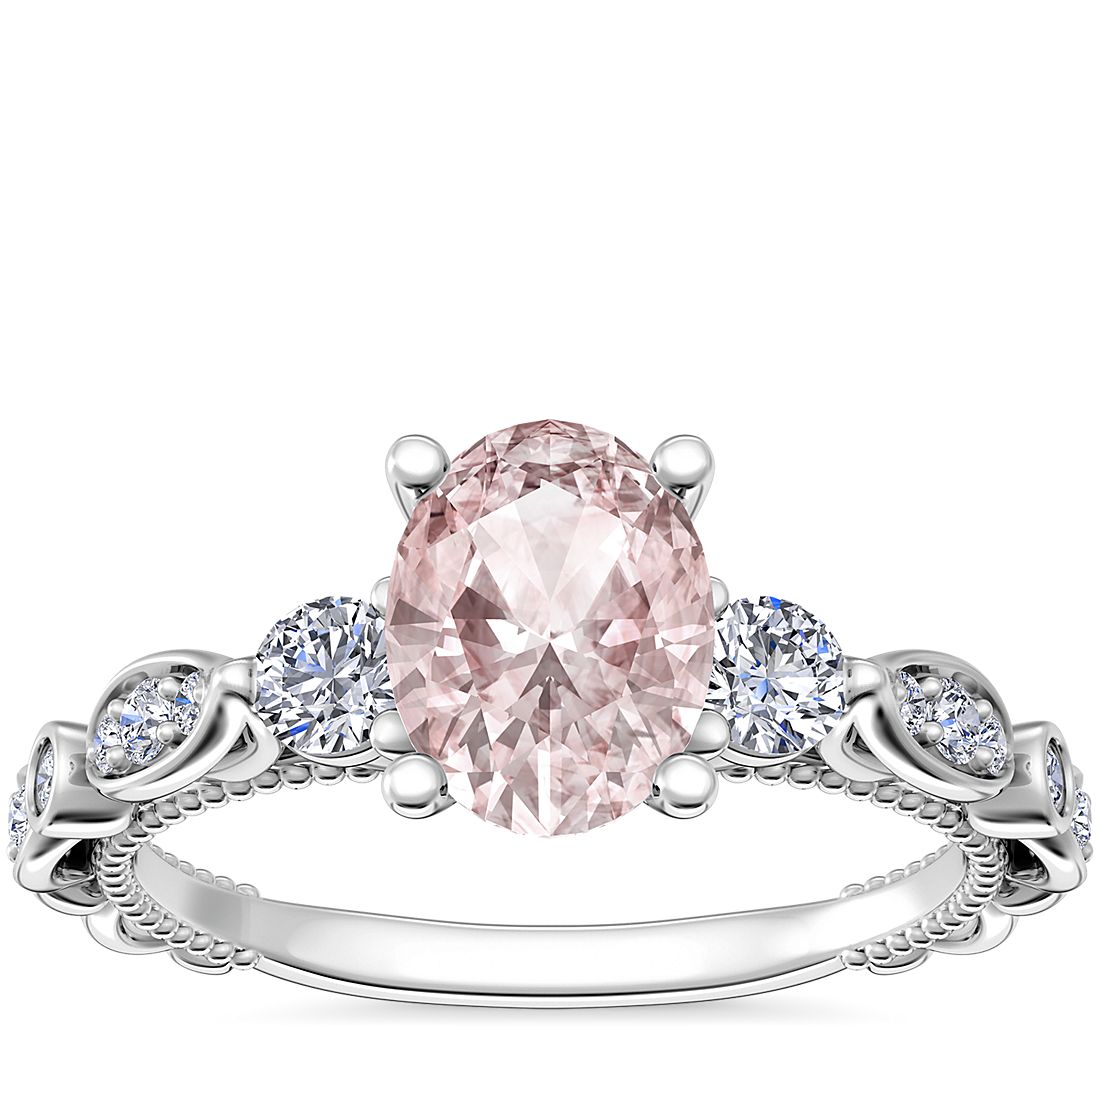 Floral Ellipse Diamond Cathedral Engagement Ring with Oval Morganite in 14k White Gold (8x6mm)